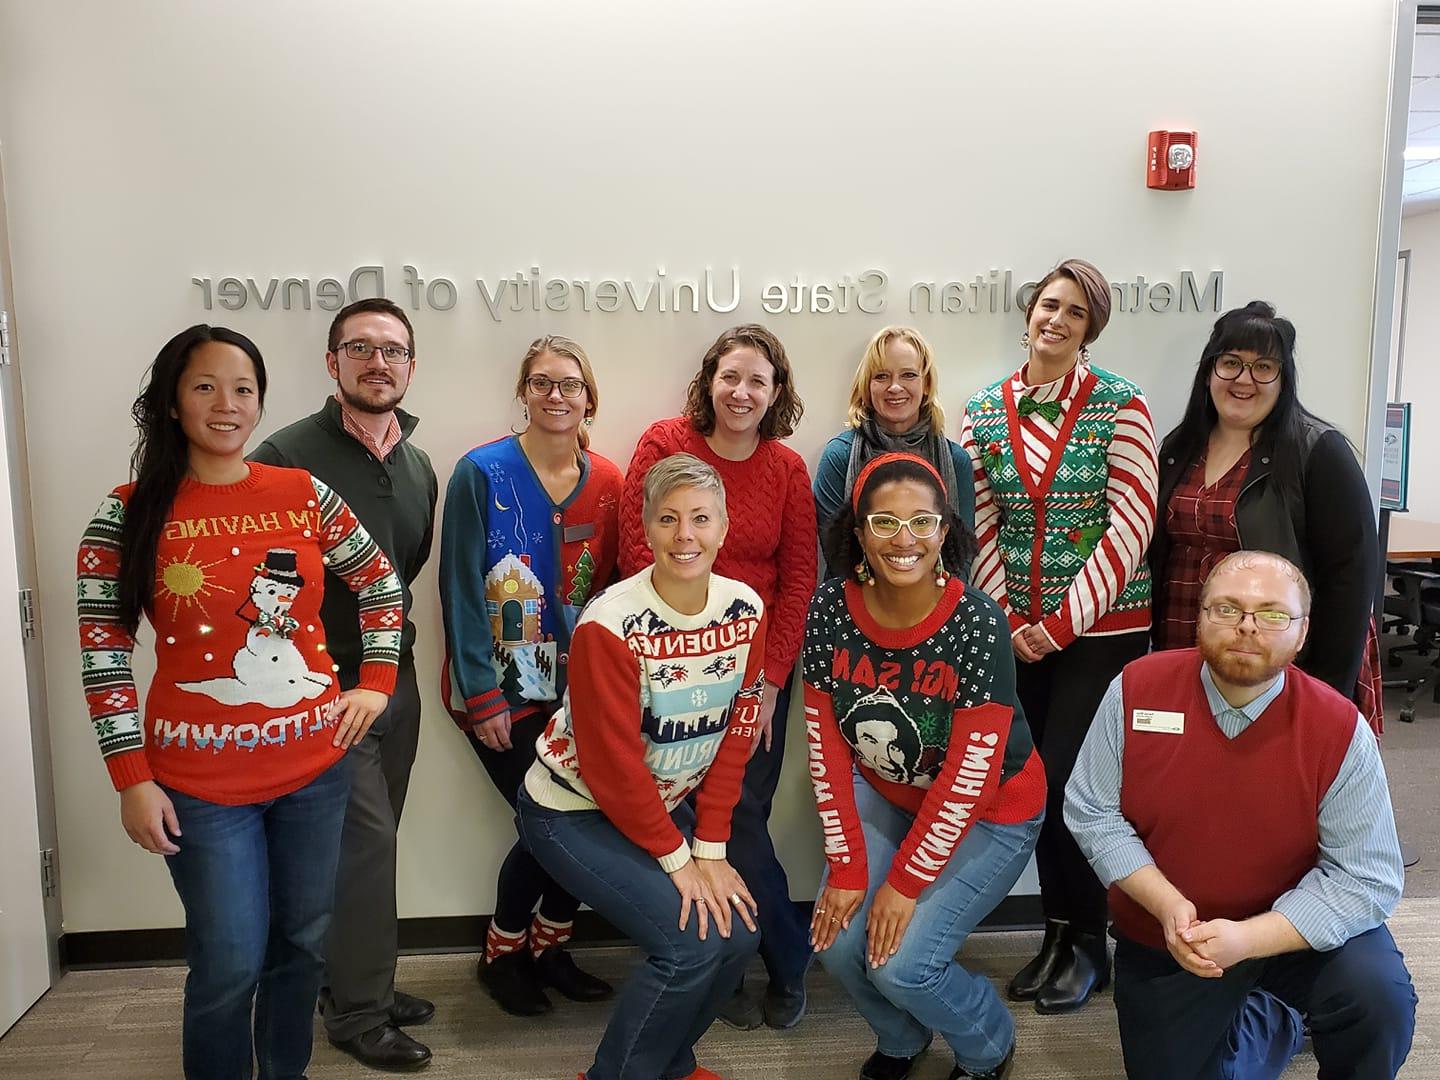 group photo with employees dressed in holiday sweaters